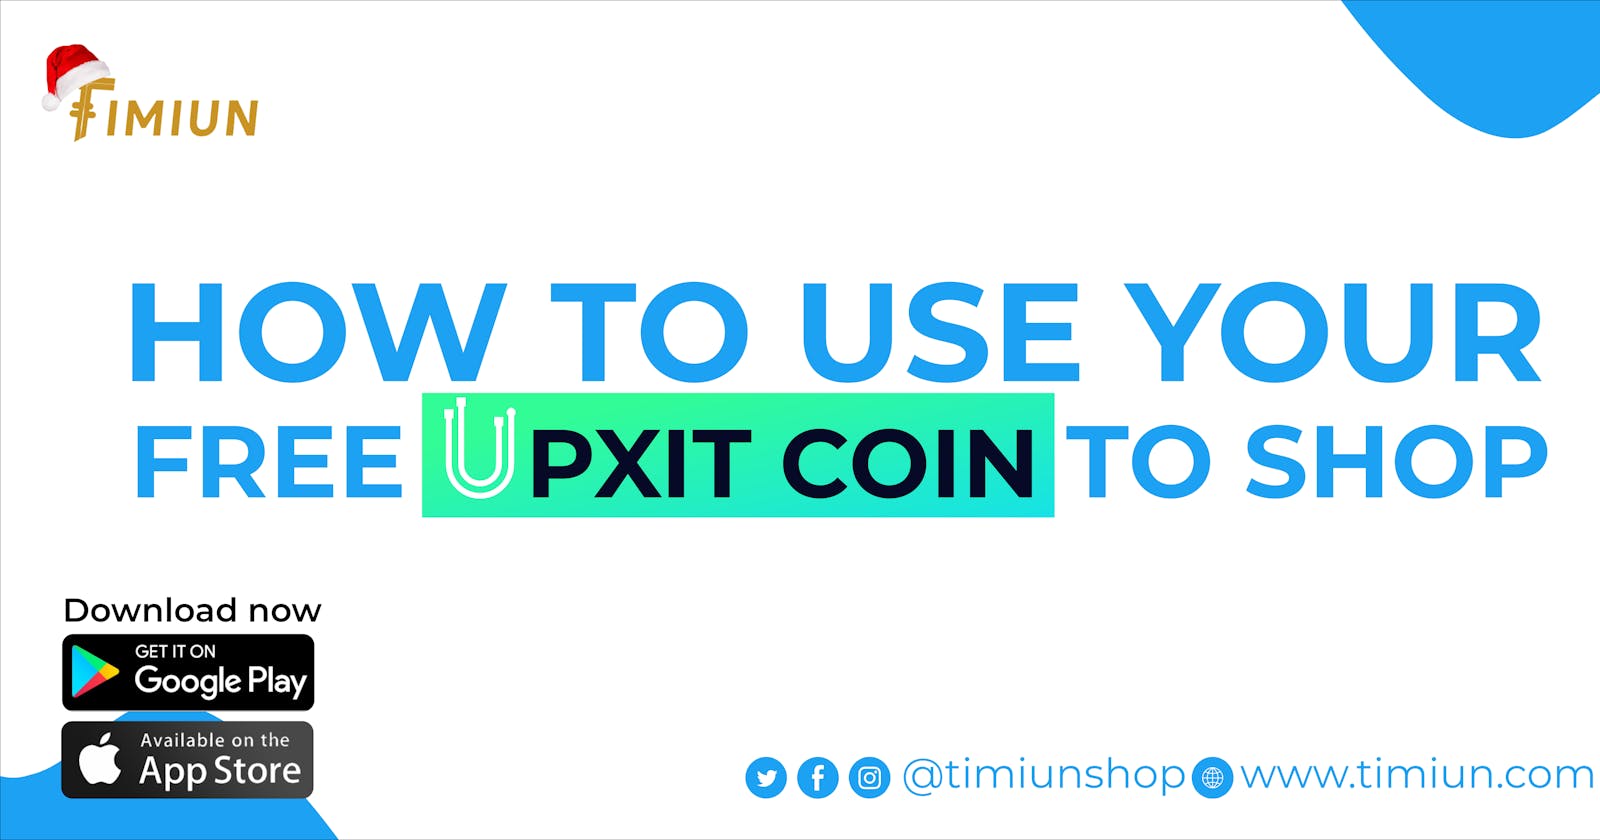 HOW TO USE YOUR FREE UPXITCOIN TO SHOP